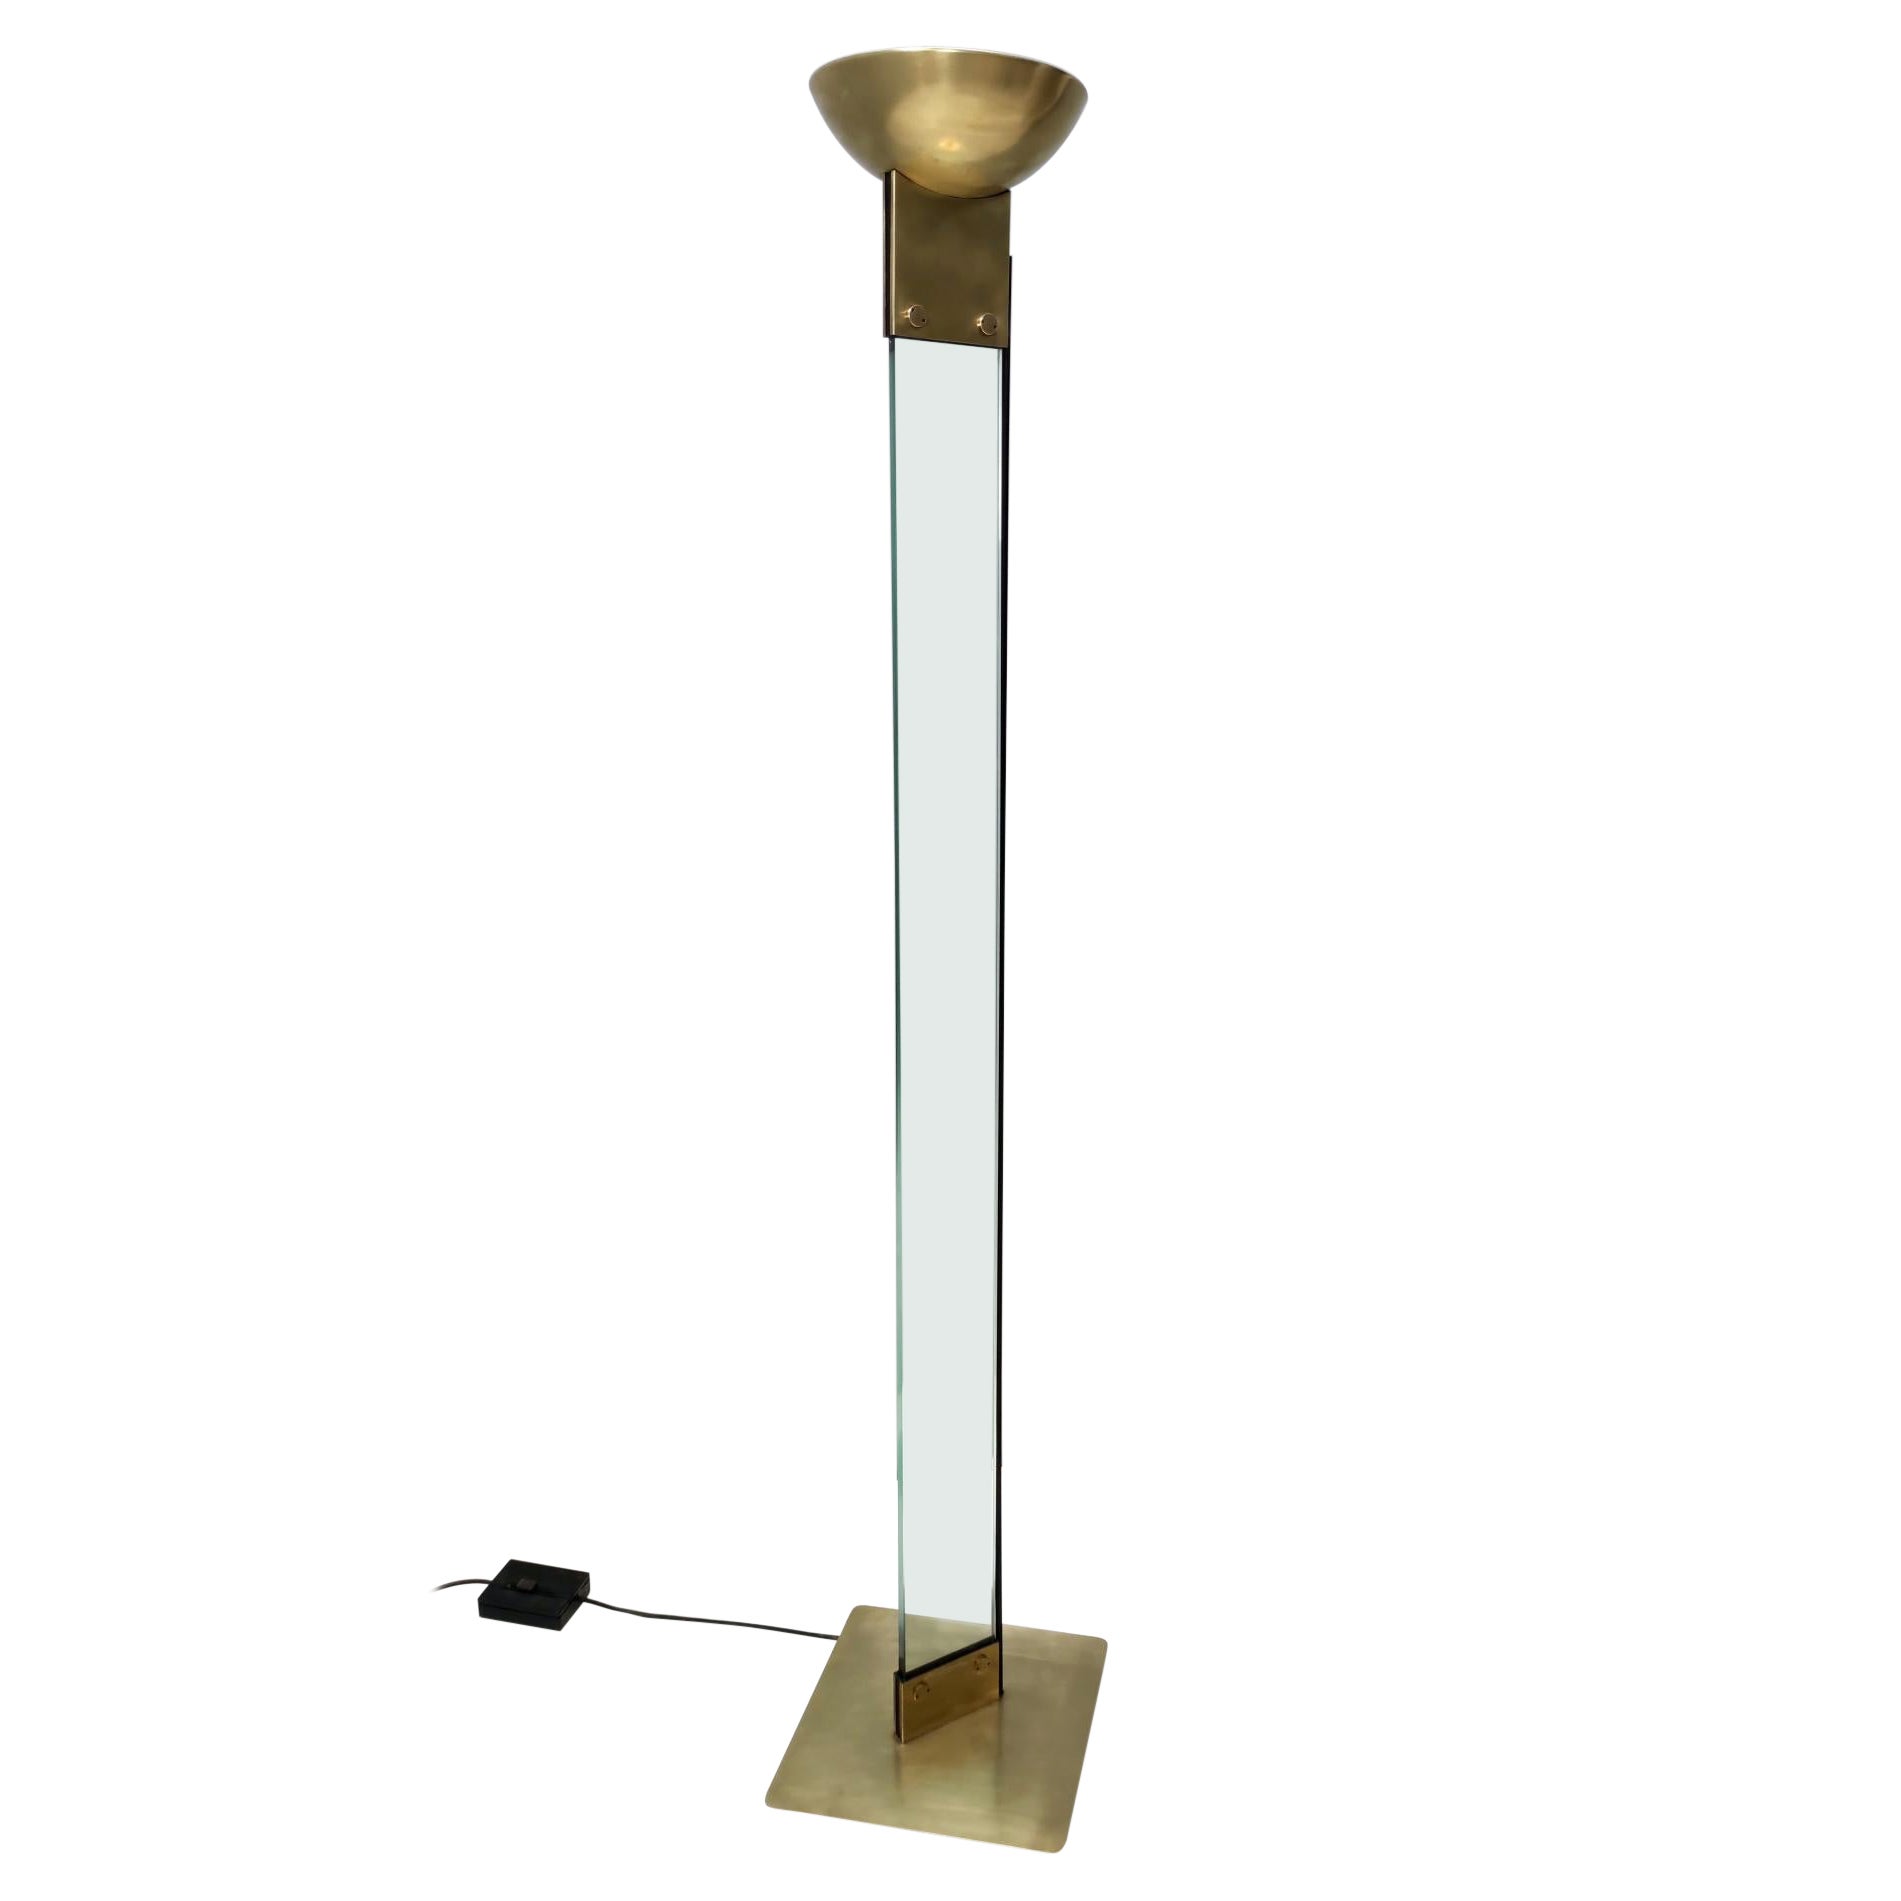 Elegant Postmodern Glass, Brass and Varnished Metal Floor Lamp, Italy, 1980s For Sale